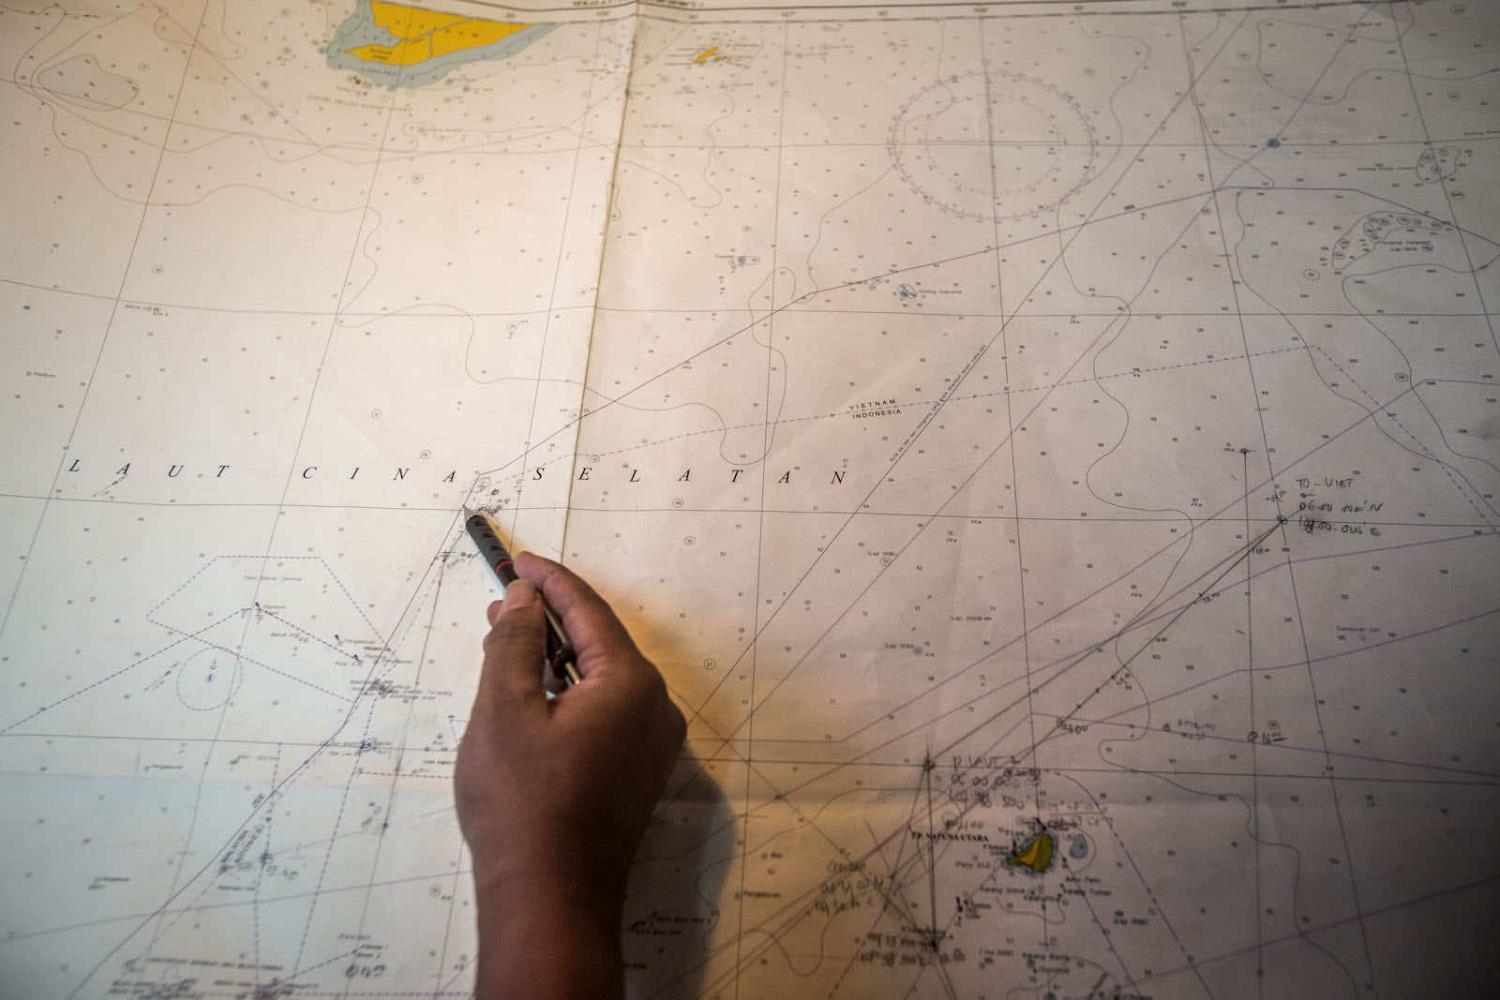 Charts on a partrol near Natuna, Ranai, Indonesia, in the South China Sea, 2016 (Ulet Ifansasti/Getty Images)